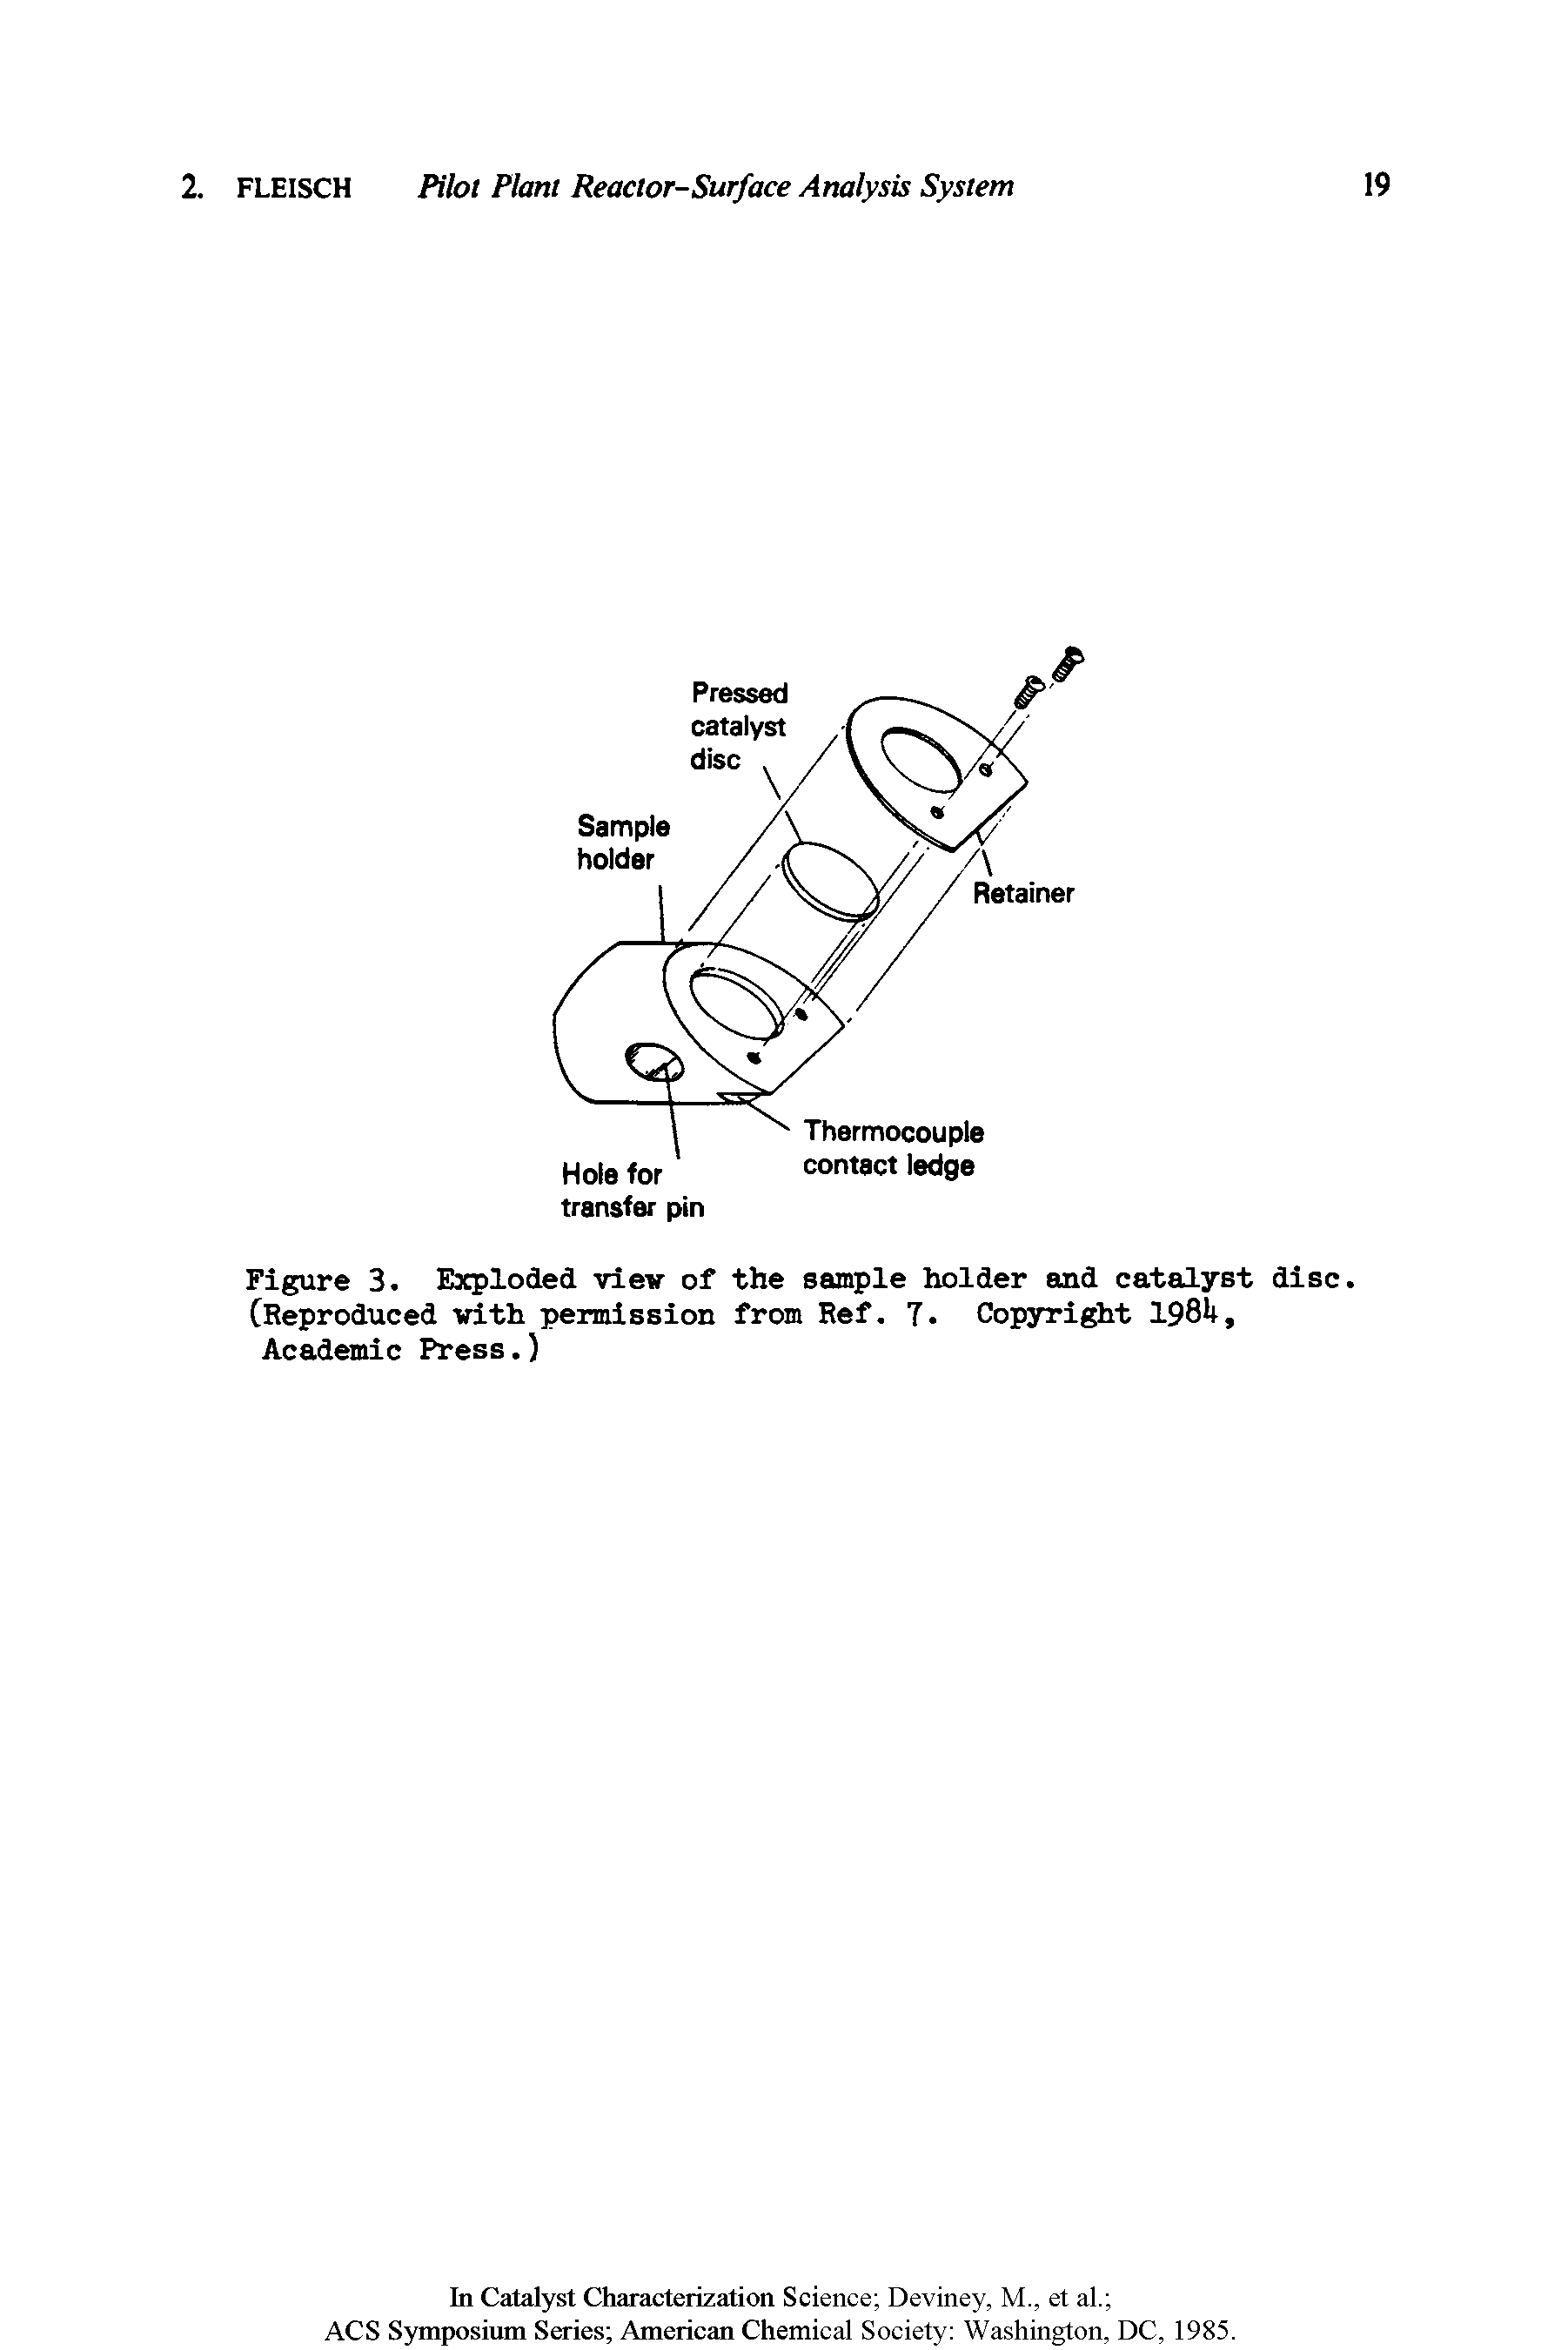 Figure 3. Exploded view of the sample holder and catalyst disc. (Reproduced with permission from Ref. 7. Copyrifdit 198U, Academic Press.)...